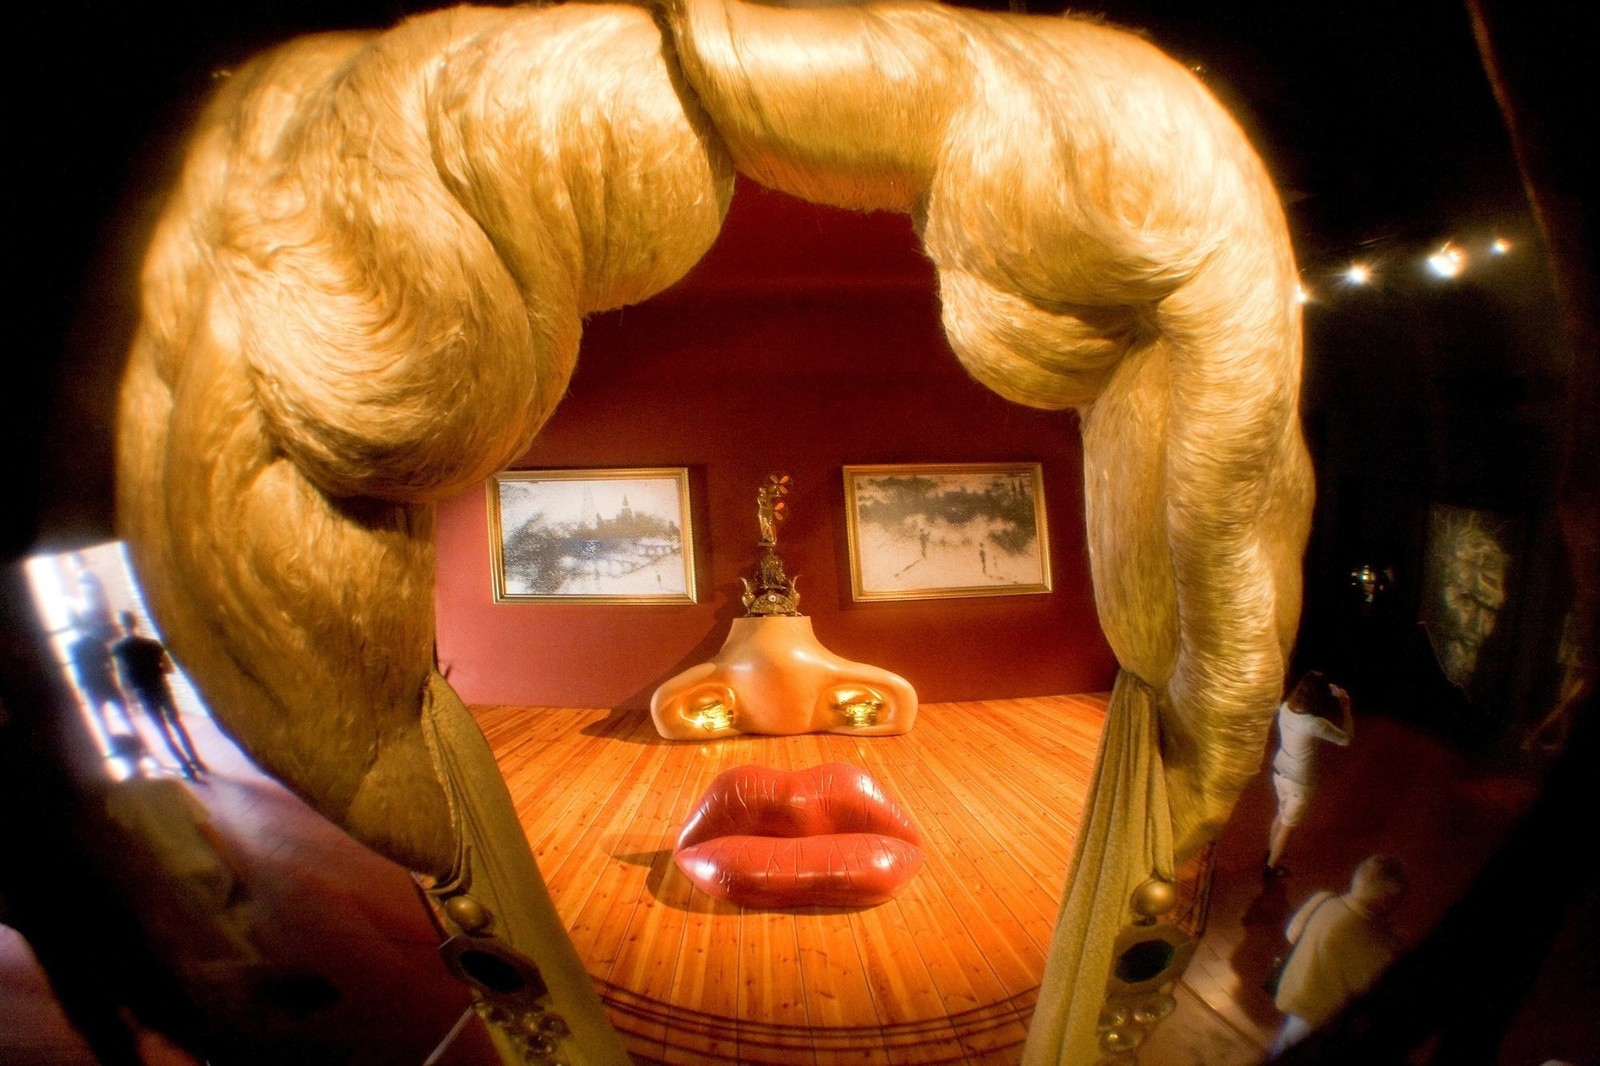 Dal&iacute; Theatre-Museum. Mae West room based on Dal&iacute;'s 1934-1935 work "Face of Mae West Which May Be Used as an Apartment"